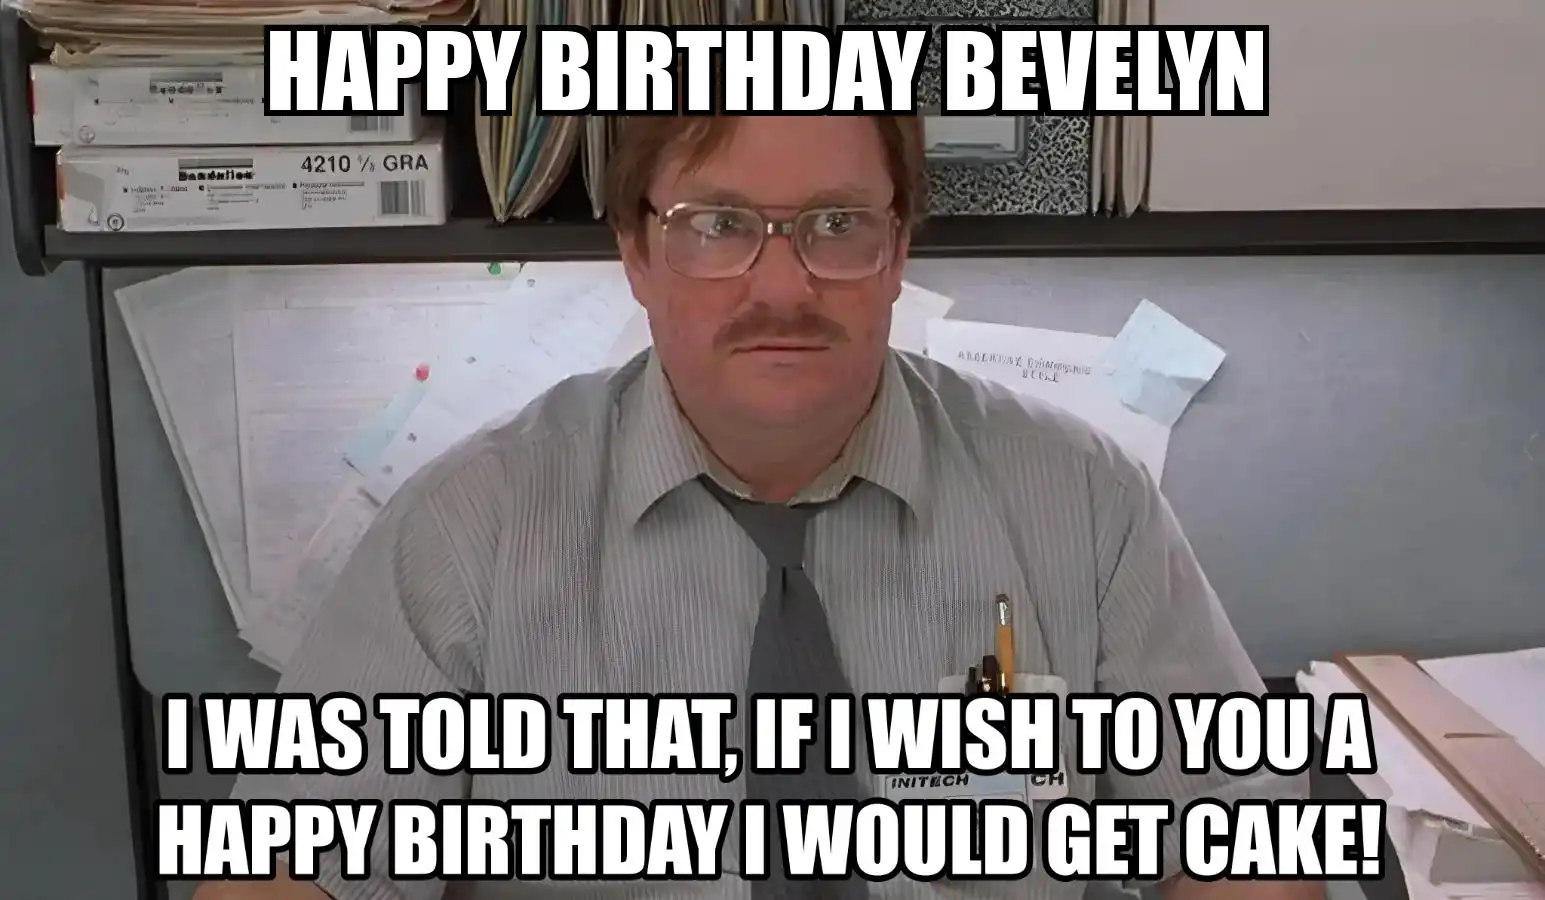 Happy Birthday Bevelyn I Would Get A Cake Meme